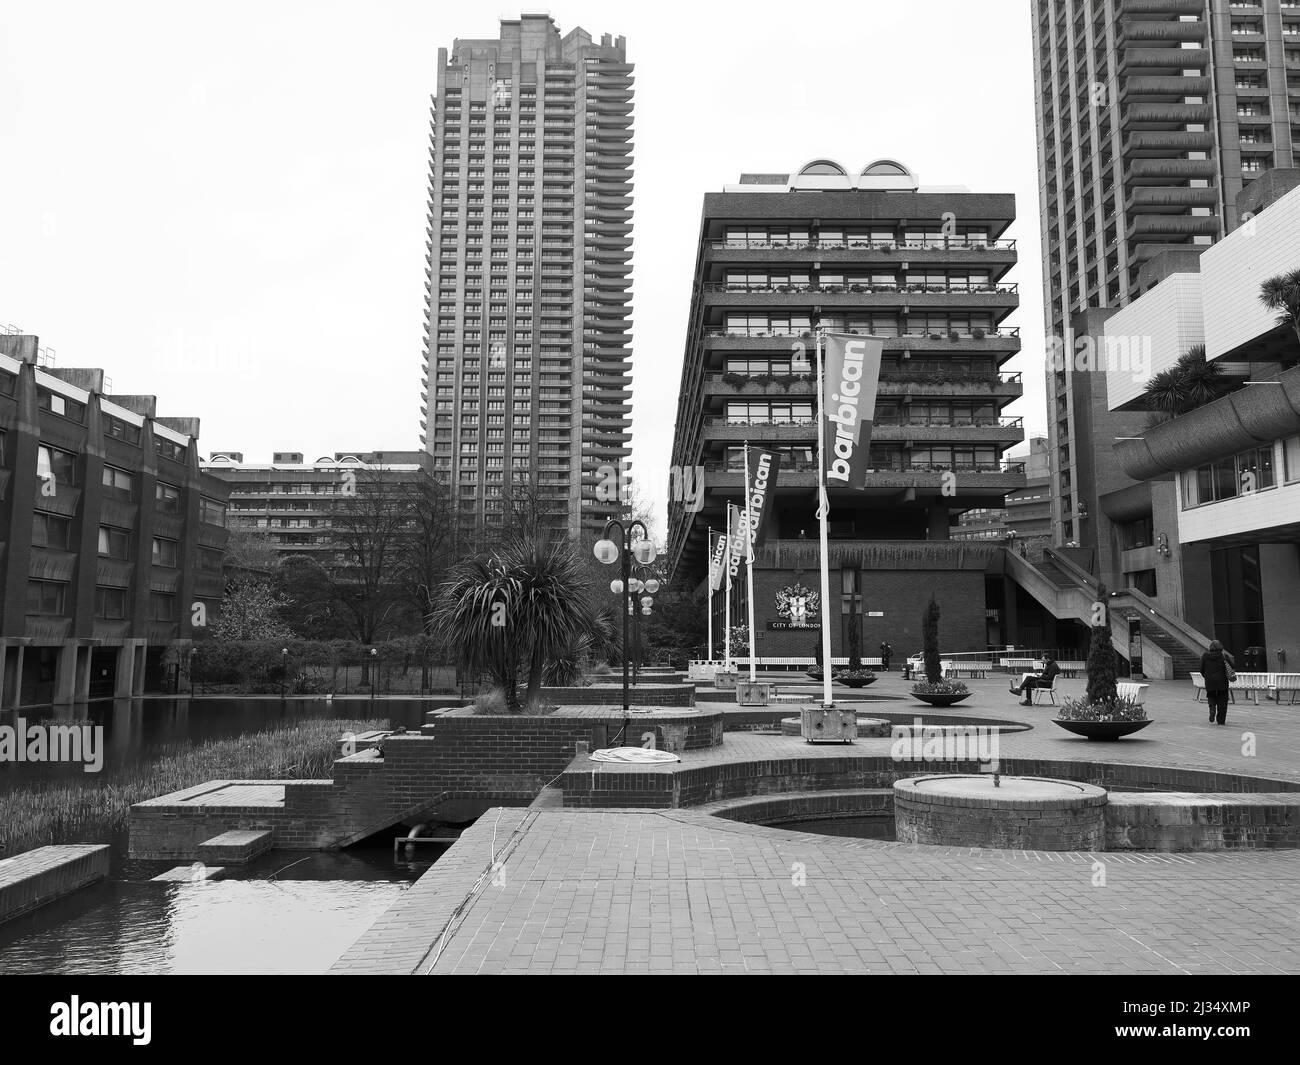 London, Greater London, England, March 29 2022: Part of the Barbican complex with high rise buildings and a courtyard seated area. Monochrome. Stock Photo